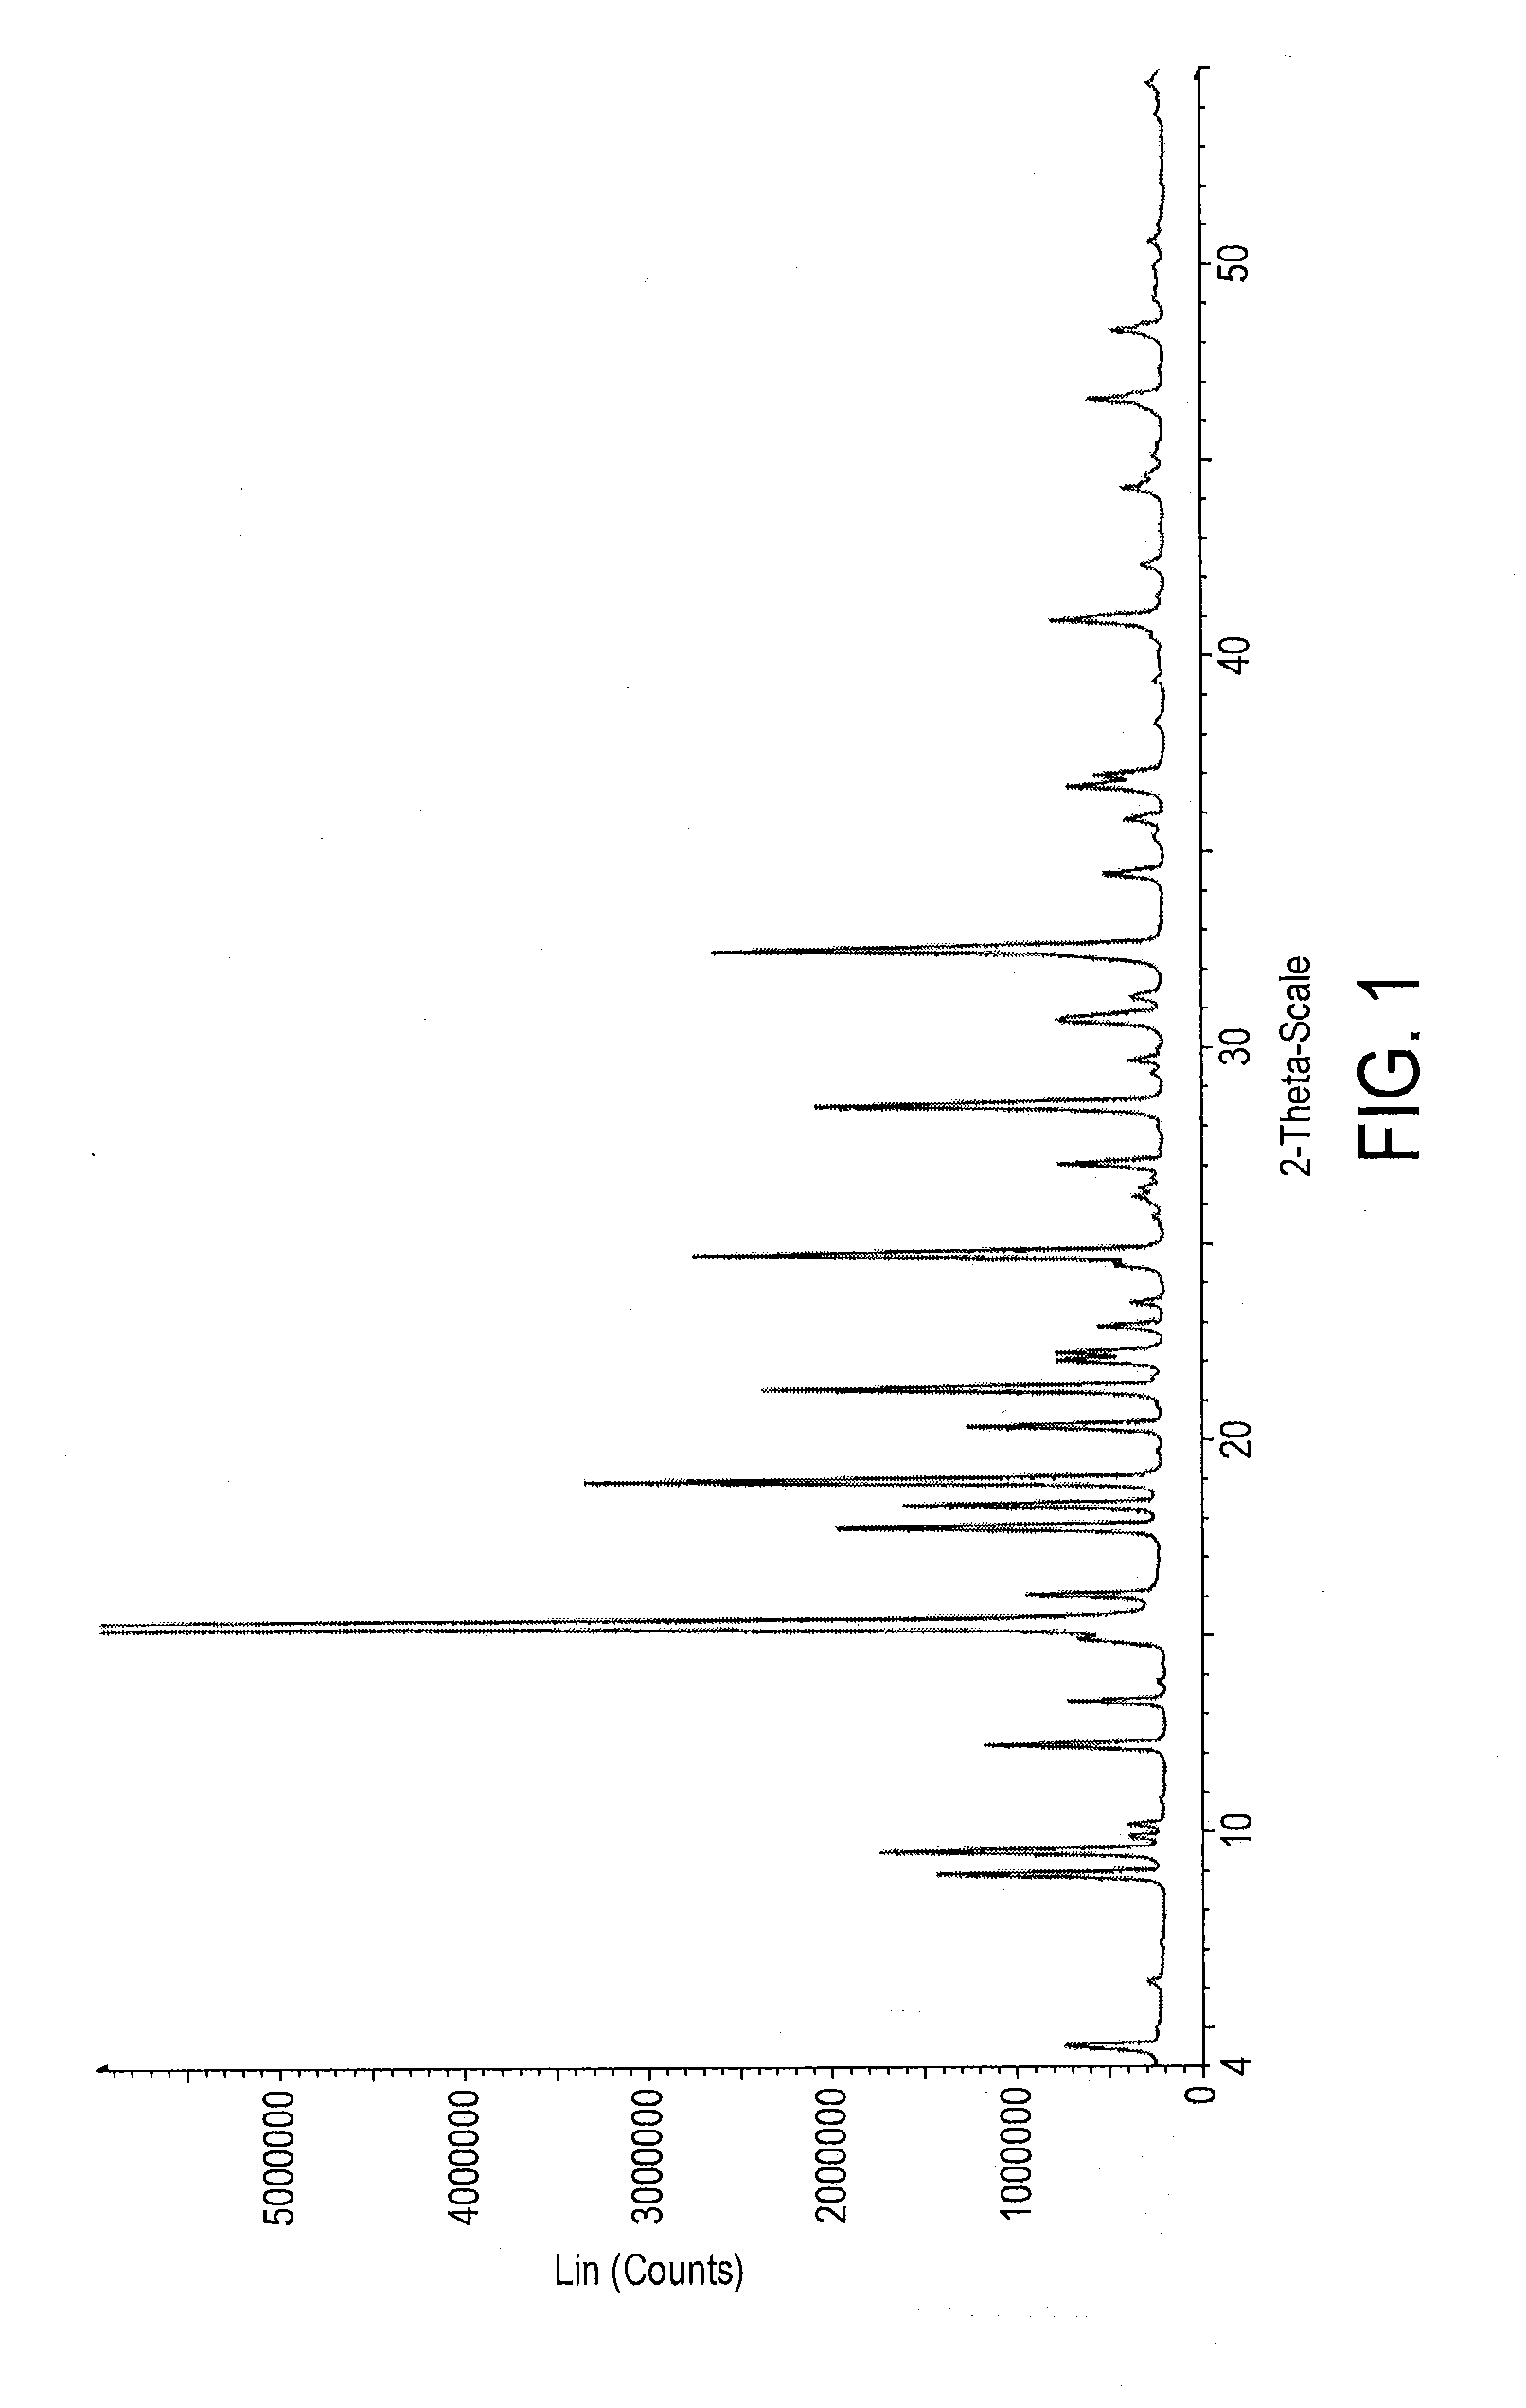 Polymorphs of bromfenac sodium and methods for preparing bromfenac sodium polymorphs